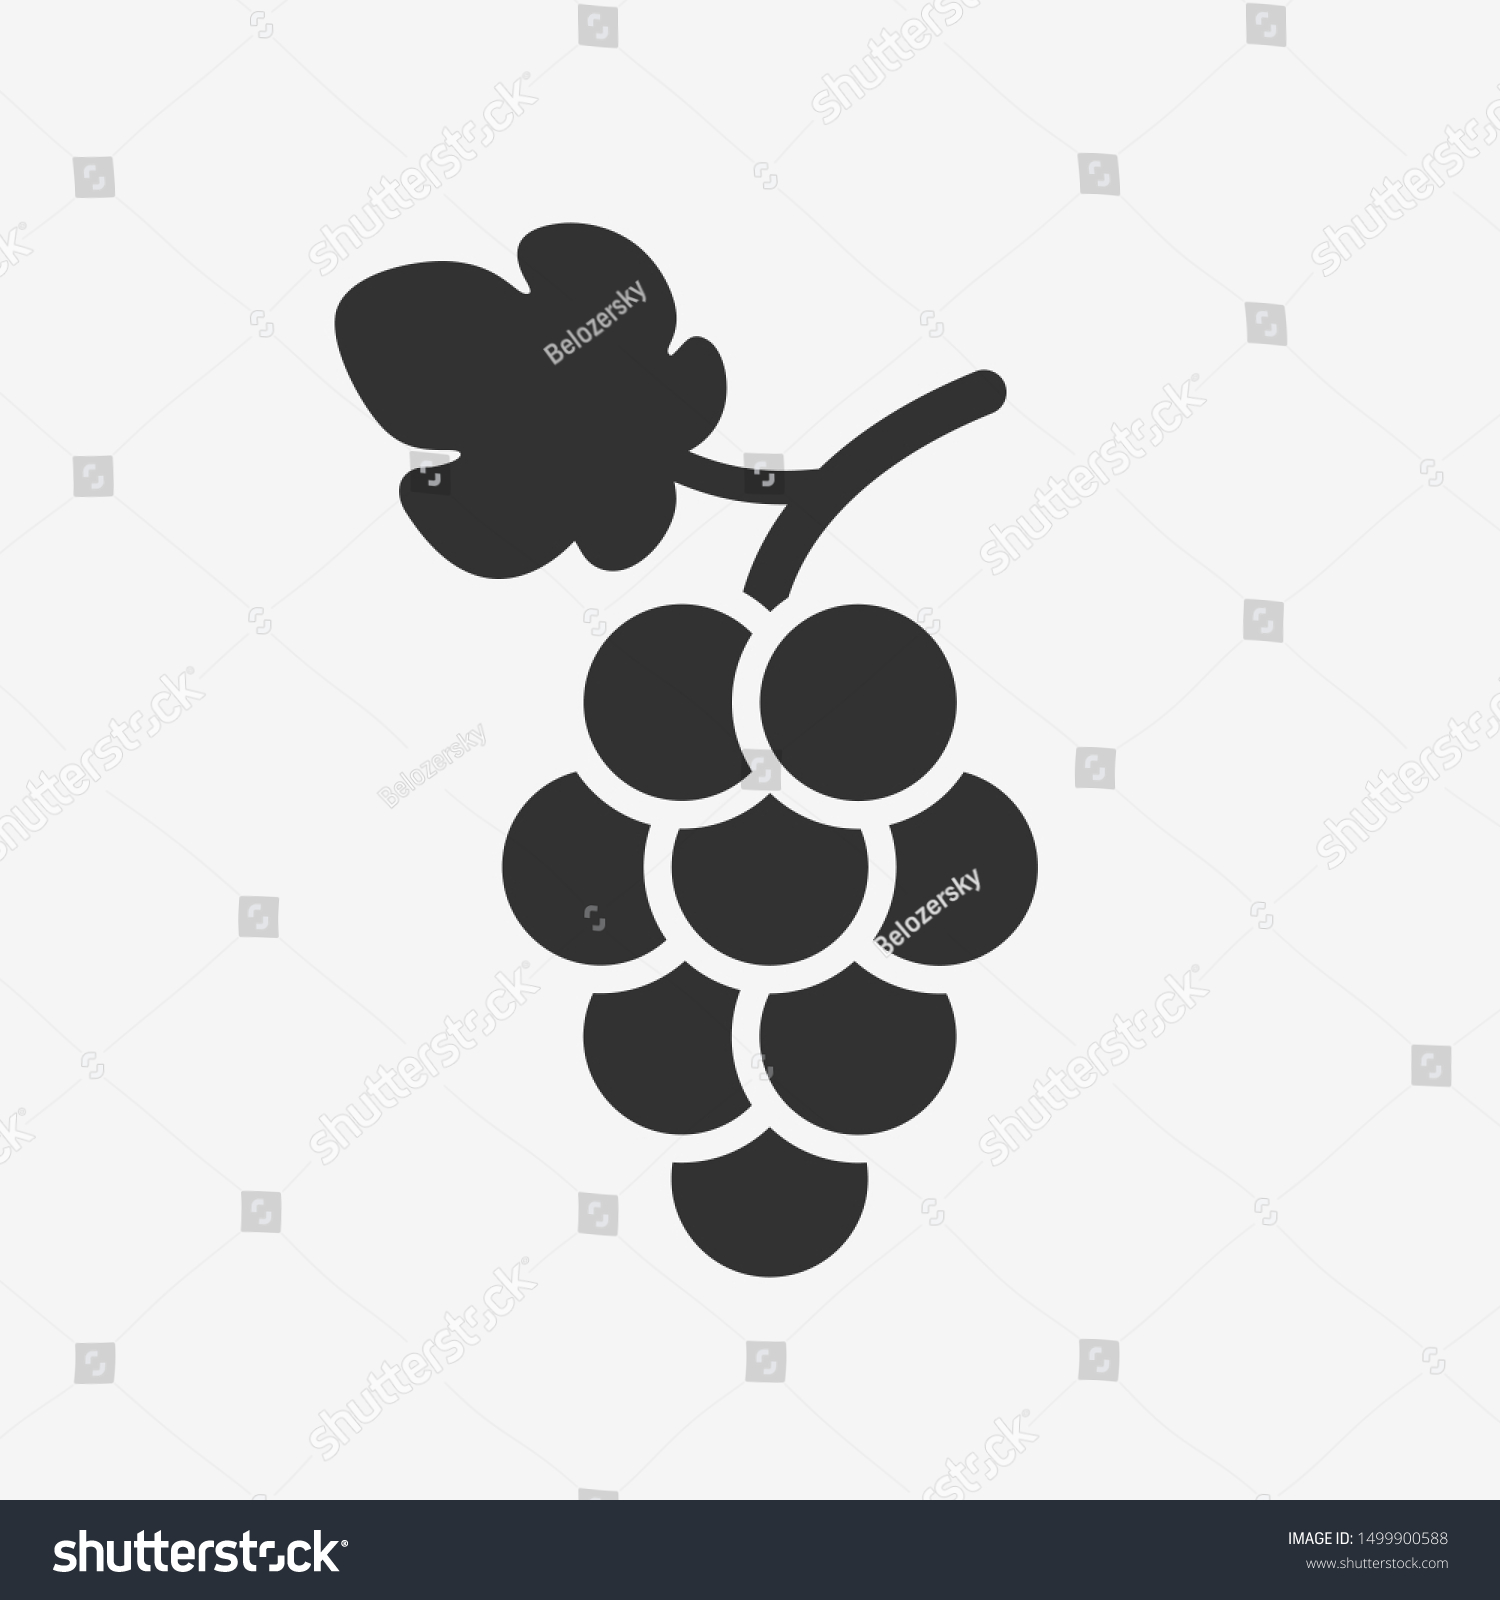 Grapes icon. Grapevine with leaf. Wine logo. Fruit pictogram. Vector illustration isolated. #1499900588